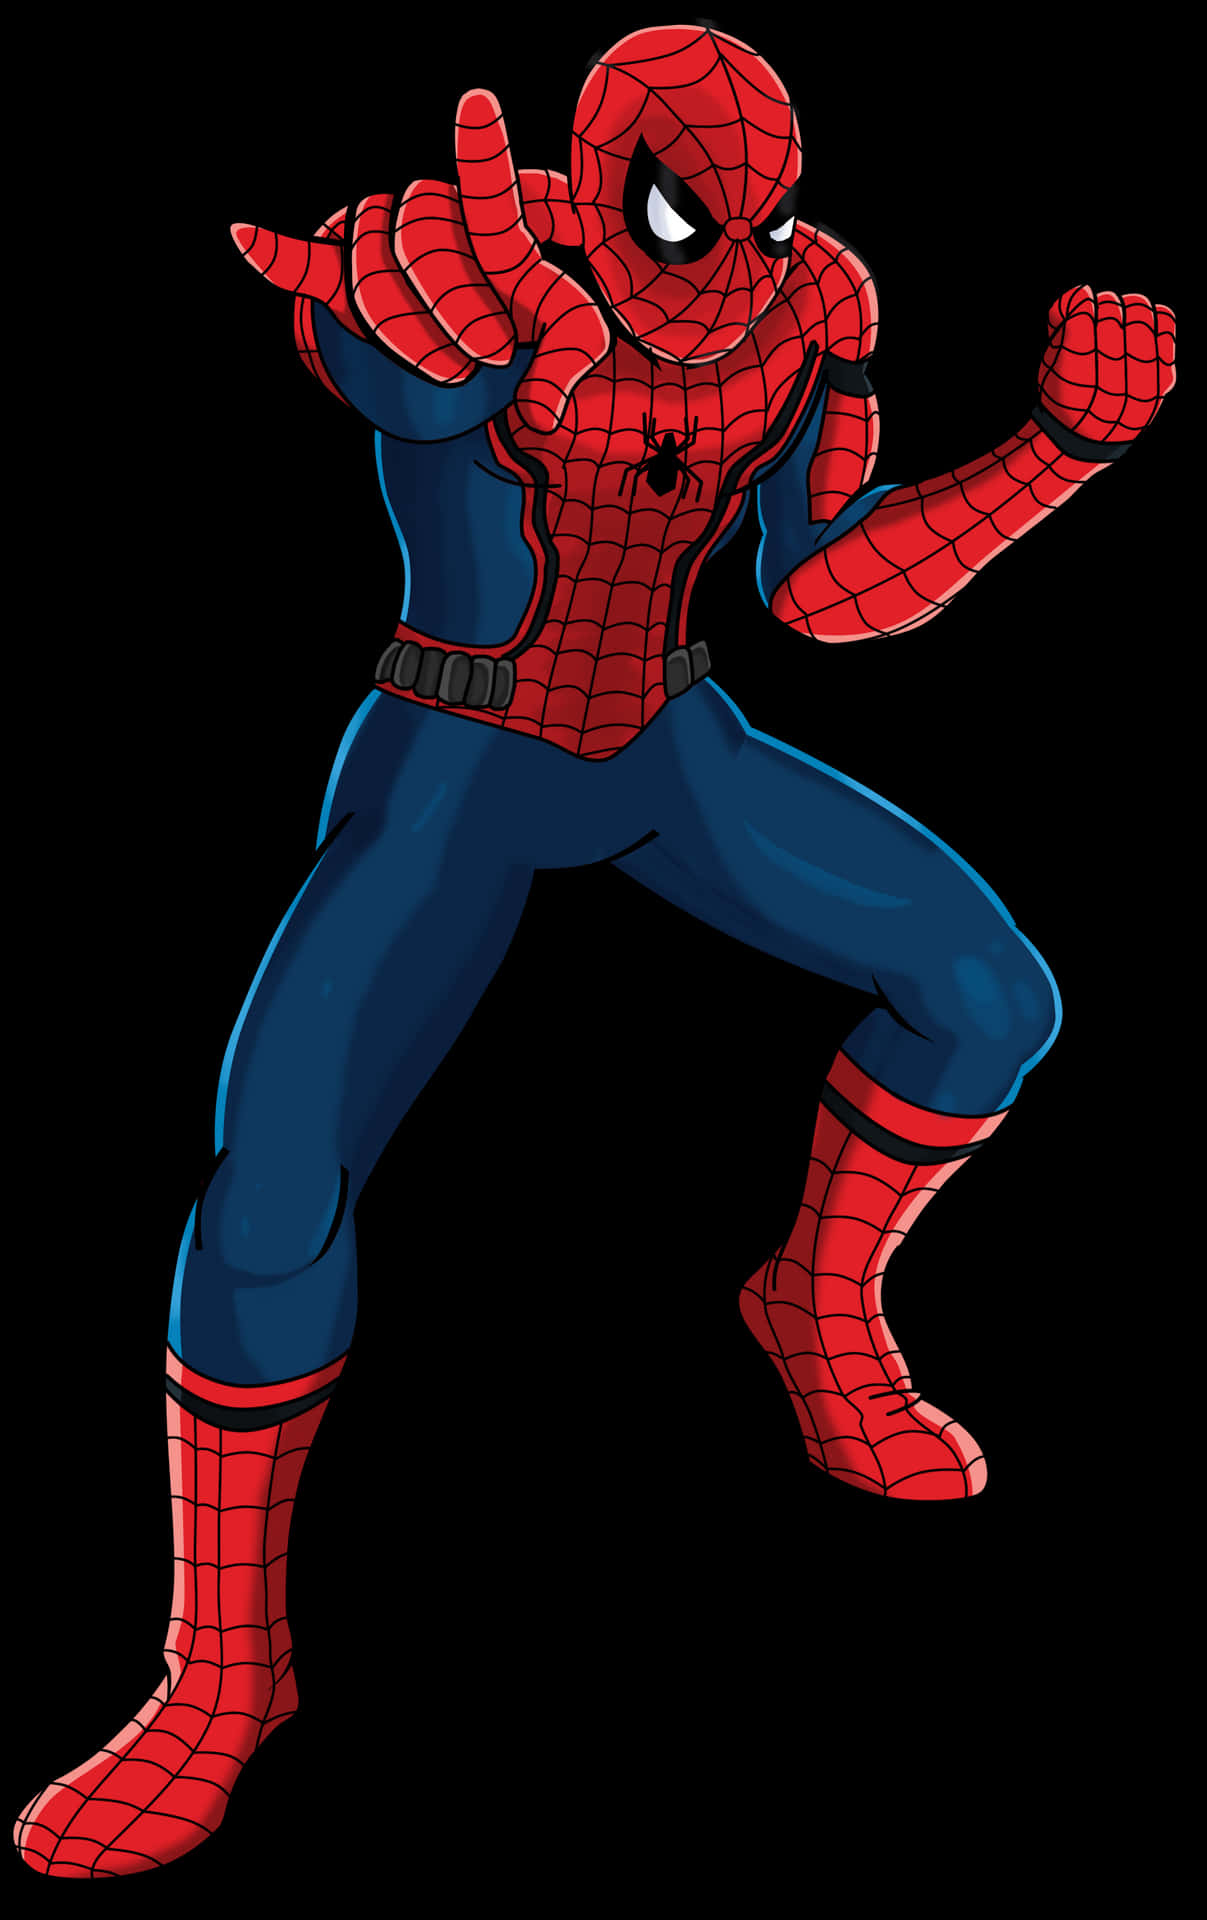 The Spectacular Spider-Man Cool Pose Wallpaper